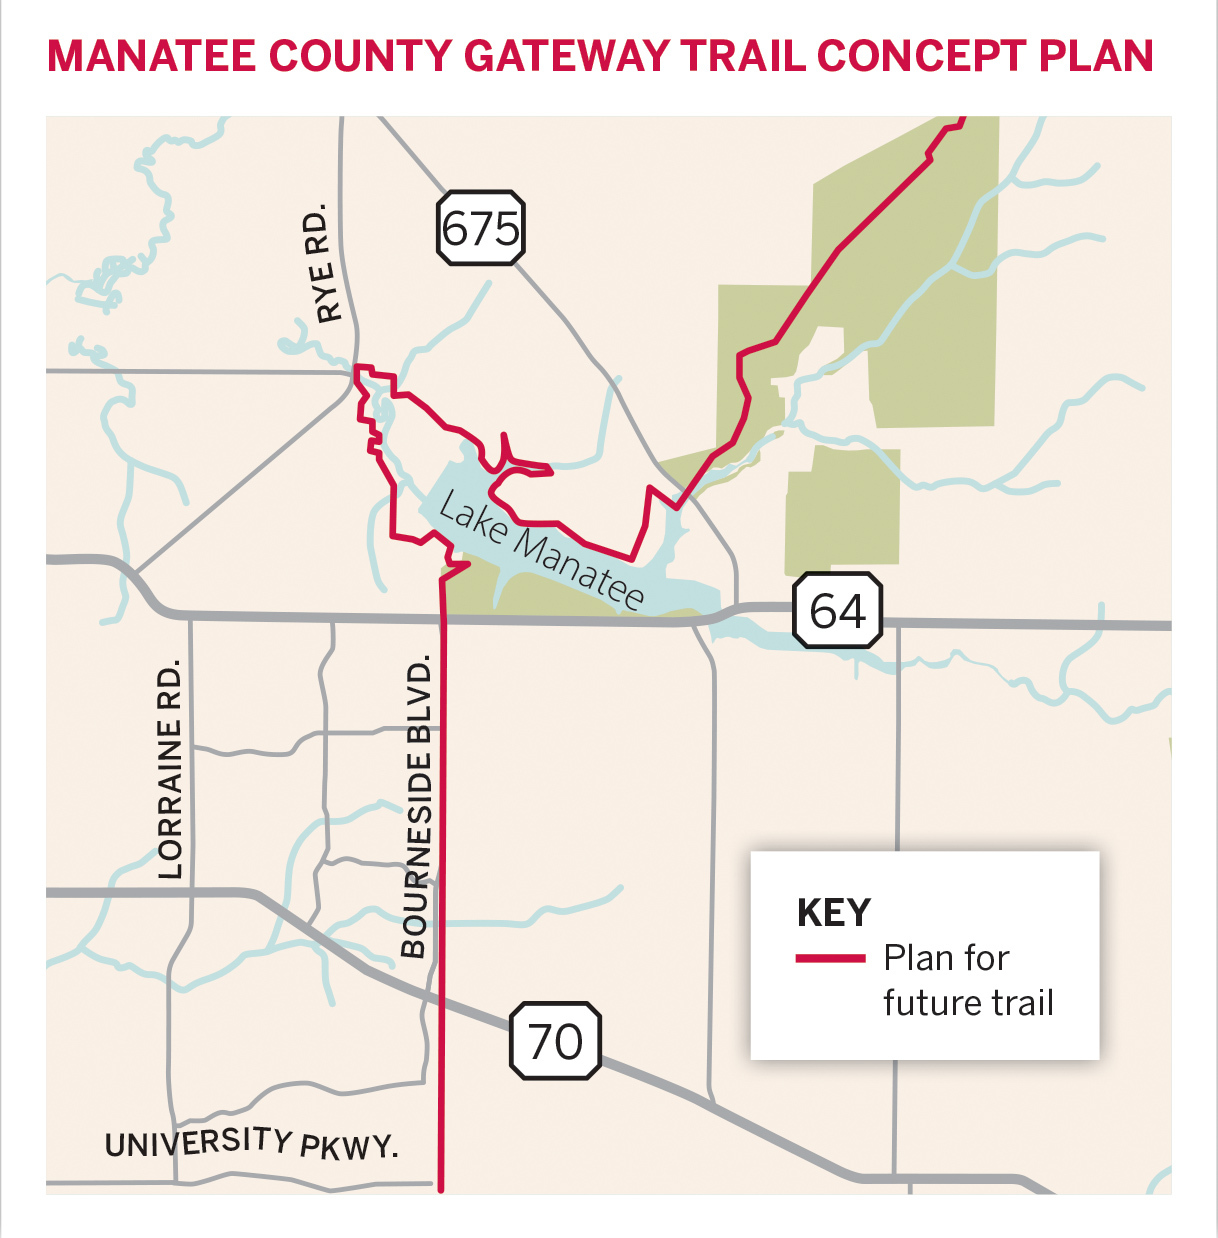 The Gateway Trail would be Manatee County’s first countywide trail system. Northern Manatee County is not included on this map because trail plans in the area are not complete.